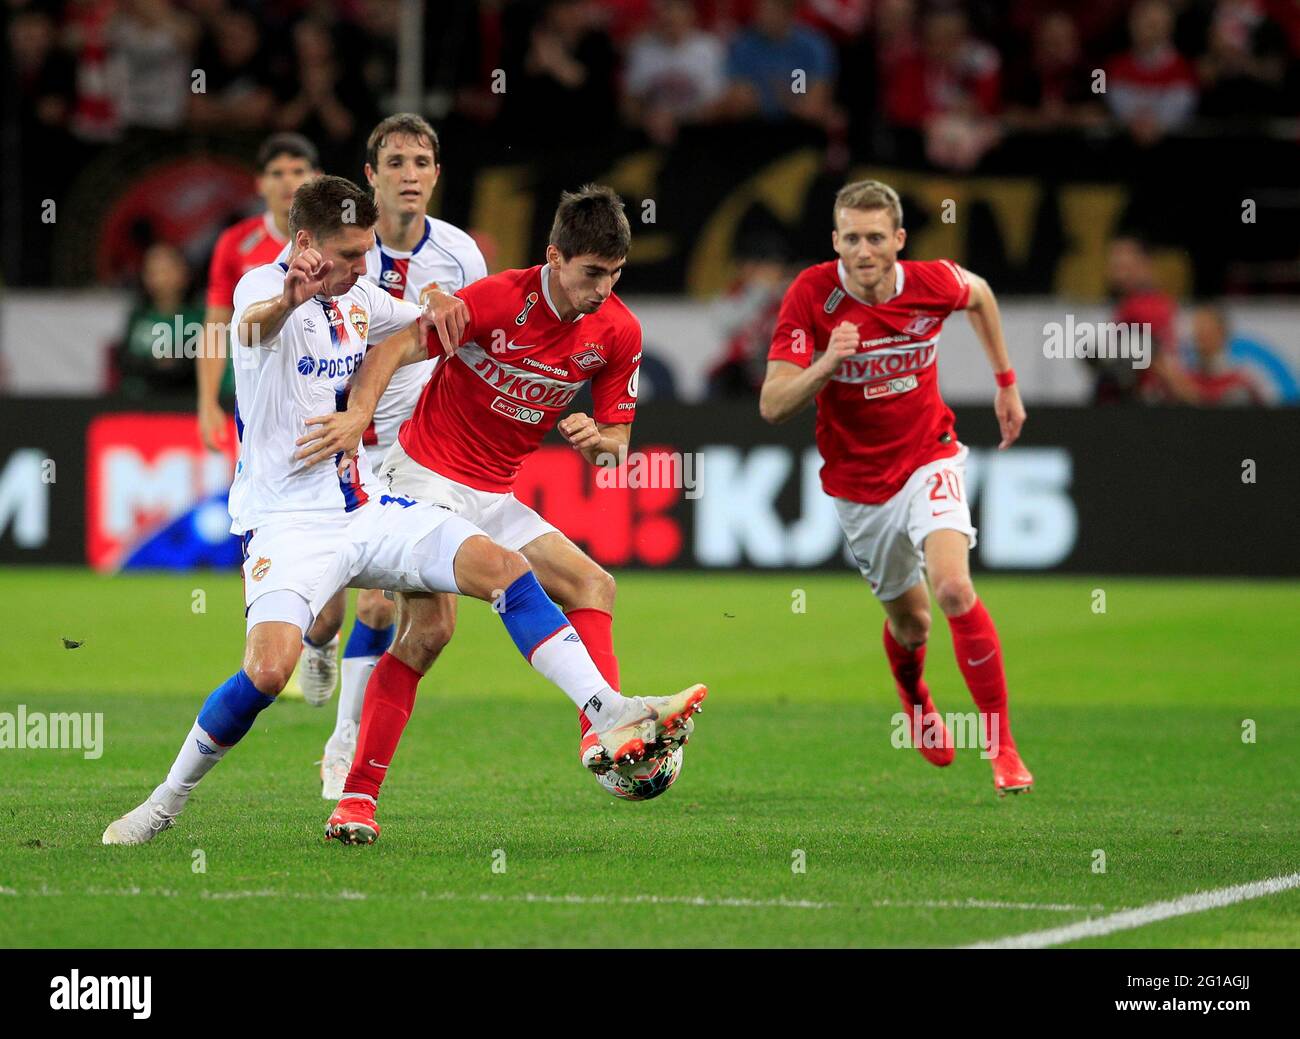 MOSCOW, RUSSIA - AUGUST 19, 2019: The 2019/20 Russian Football Premier  League. Round 6. Football match between Spartak (Moscow) vs CSKA (Moscow)  at Otkrytie Arena. Photo by Stupnikov Alexander/FC Spartak Stock Photo -  Alamy